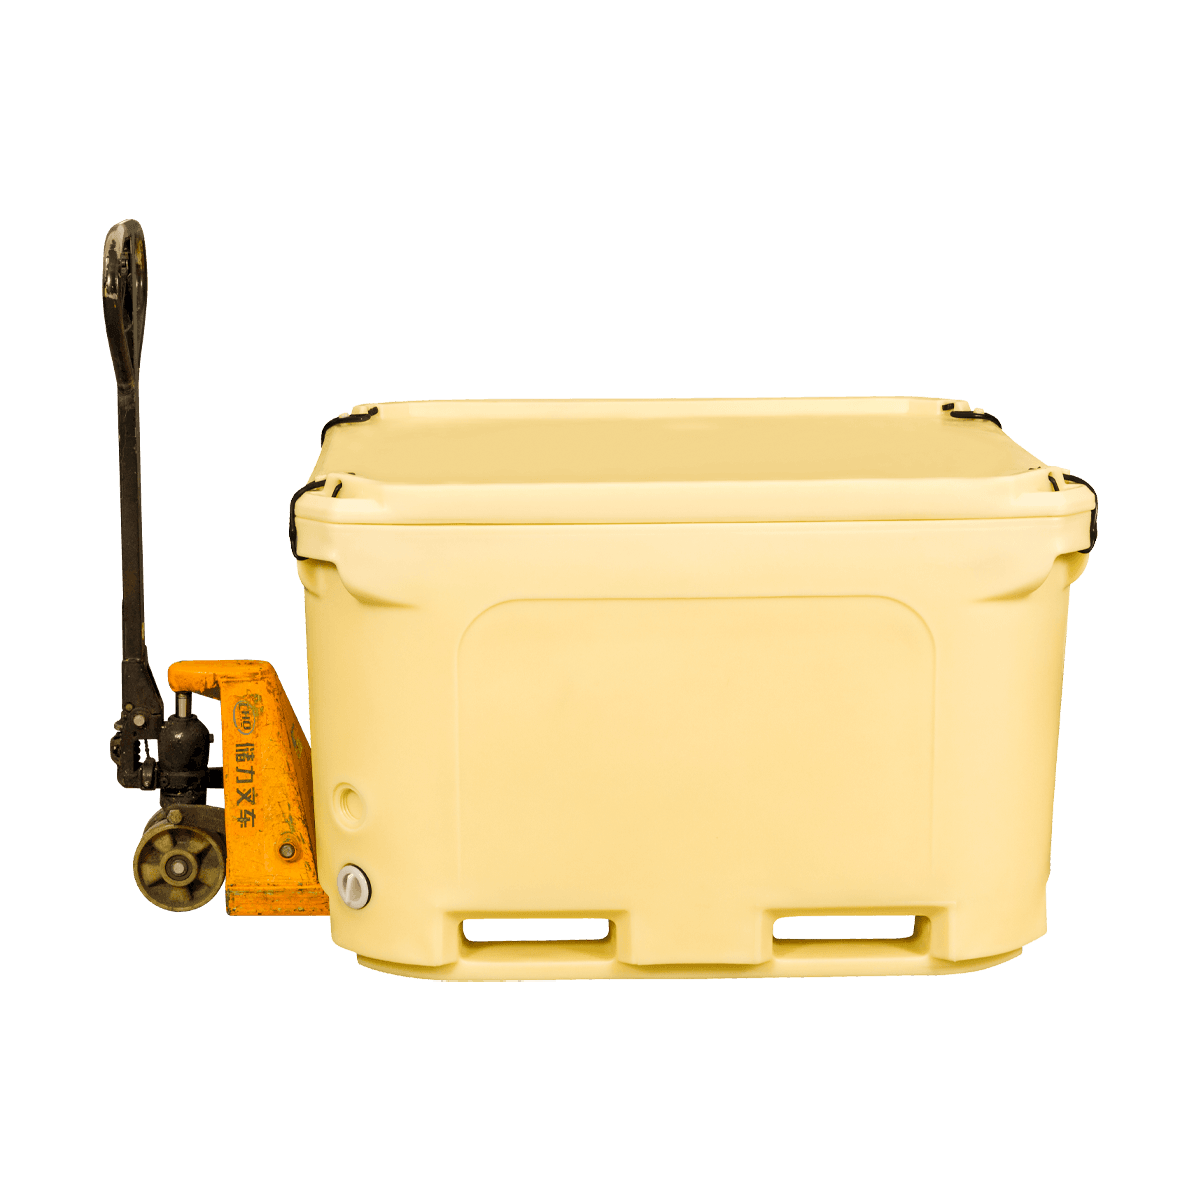 Several Precautions For Refrigerated Food In Insulated Storage Containers